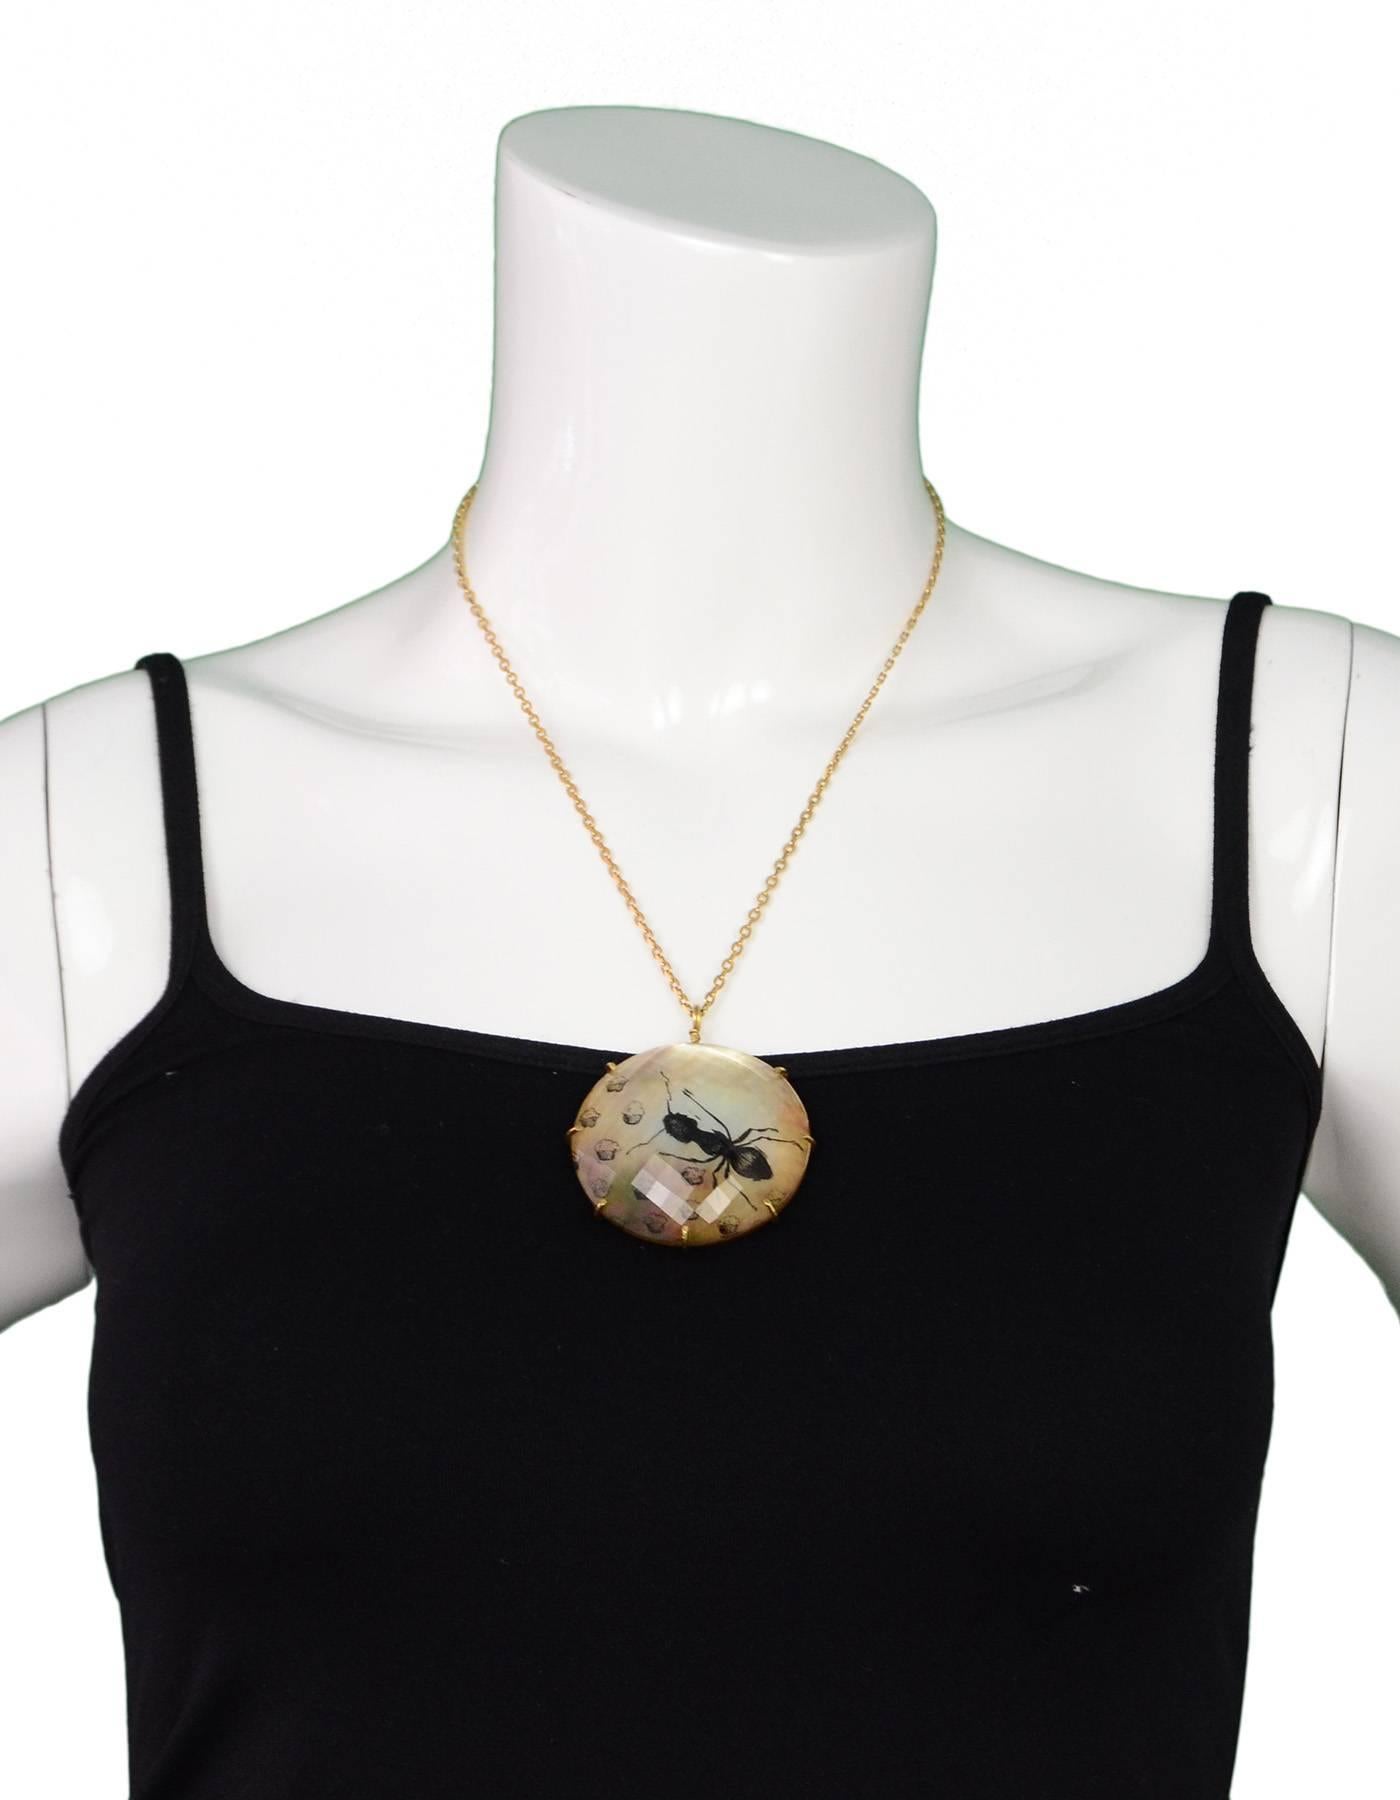 Anna Ruth Henriques 18k Mango Gold & Crystal Pendant Necklace 
This necklace is one-of-a-kind. Features ant and cupcake design inside of a faceted rock crystal set in 18k mango gold spider web.  Small diamond on signature spider charm at back